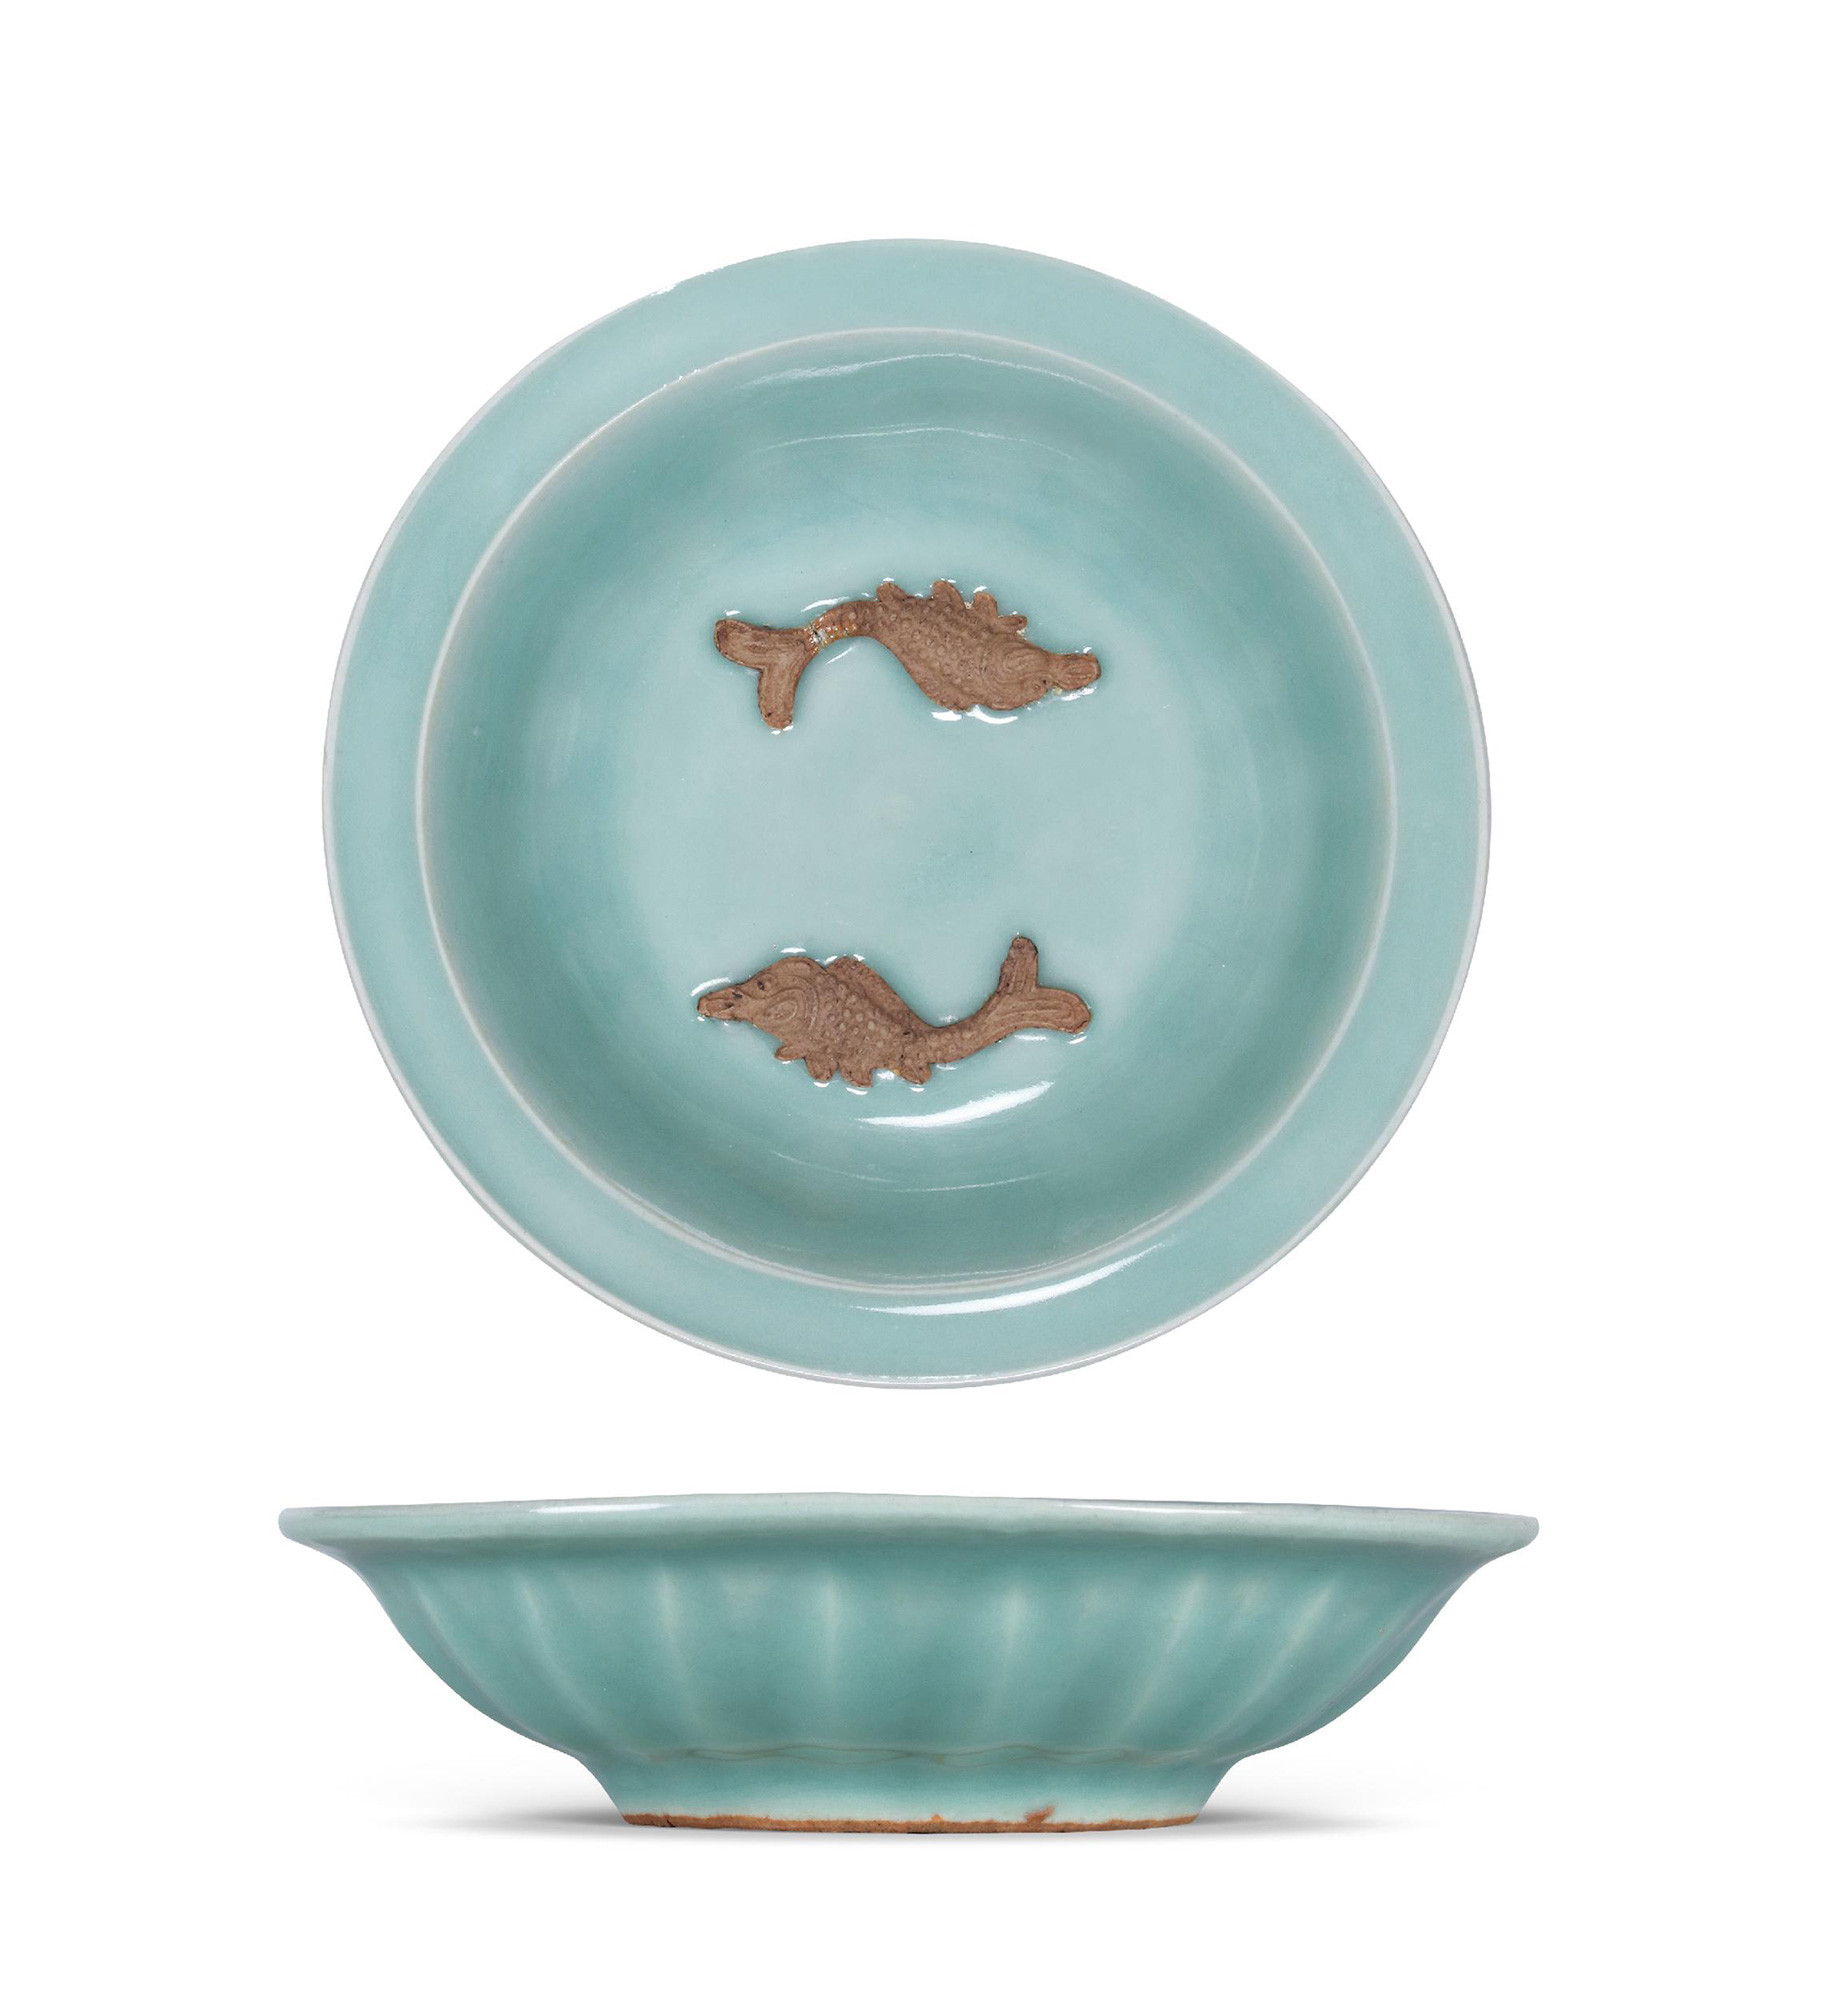 A LONGQUAN WARE CELADON WASHER WITH DESIGN OF DOUBLE FISHES